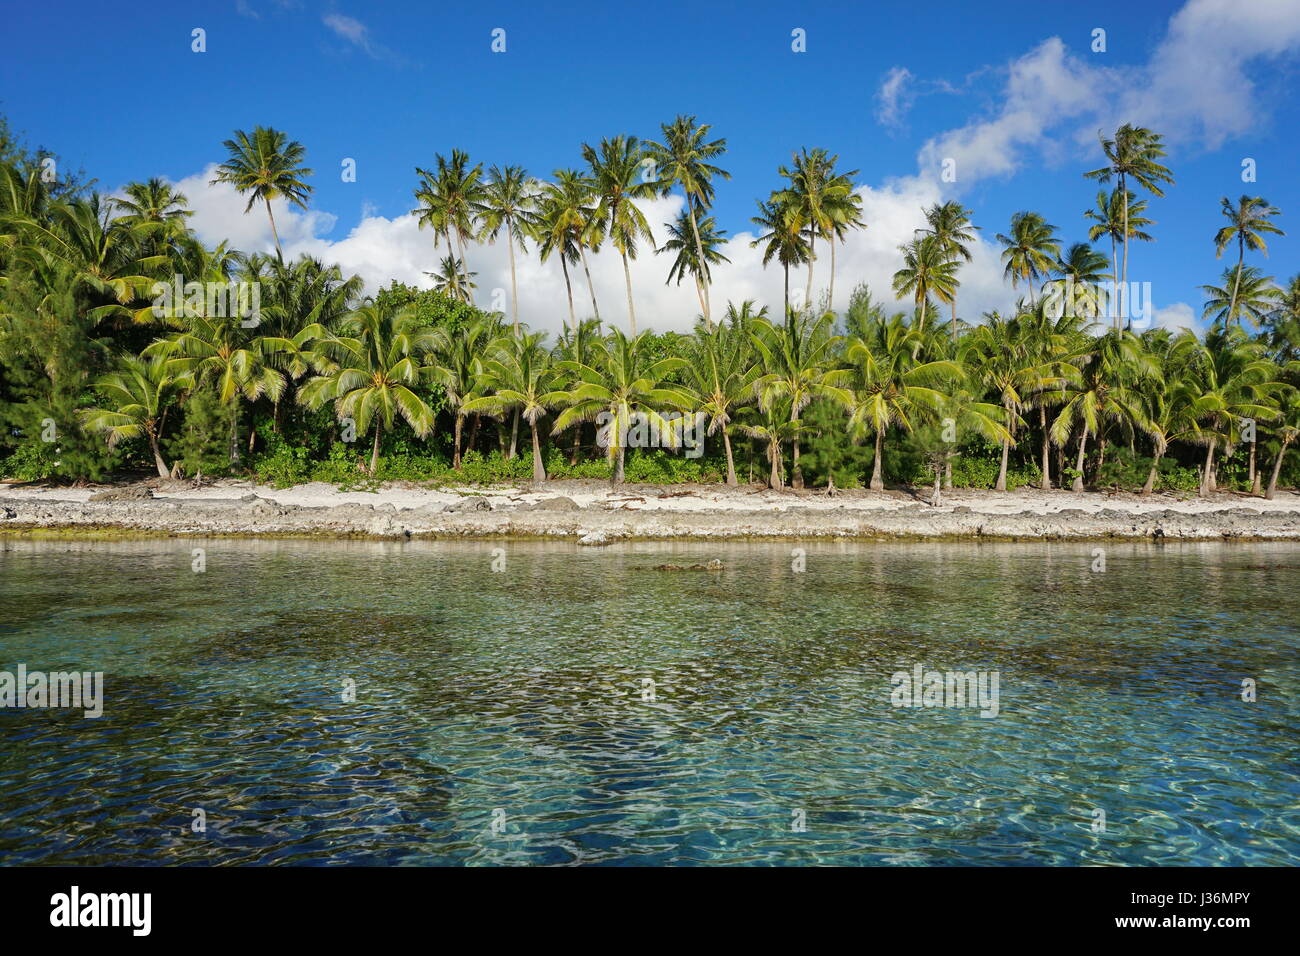 Tropical seashore, coconut palm trees on unspoiled coast of Huahine island, French Polynesia, south Pacific Stock Photo